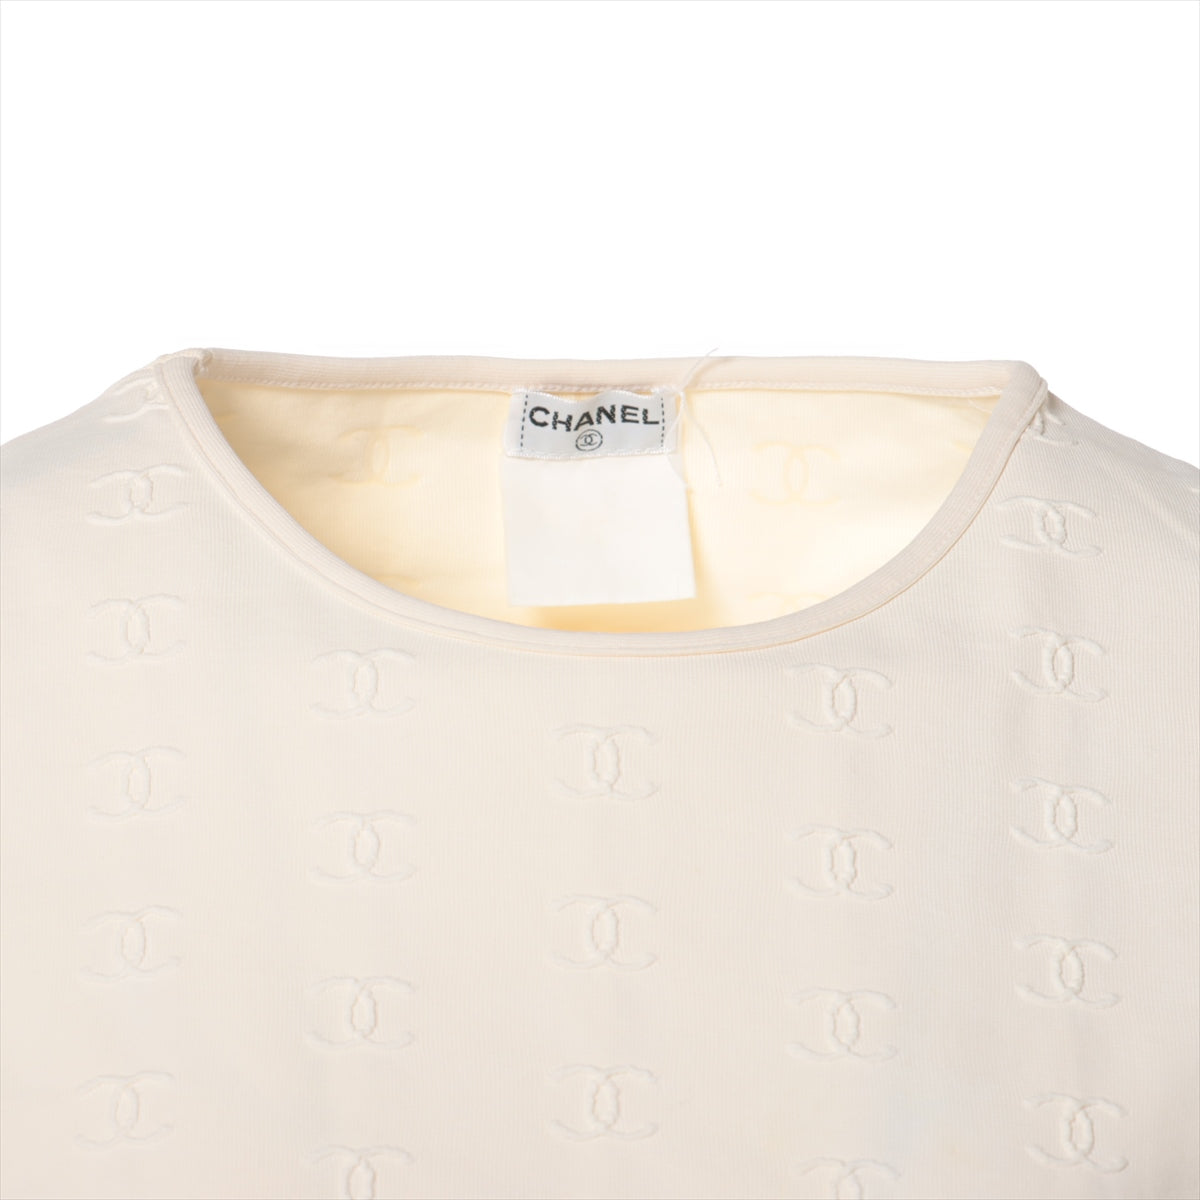 Chanel Coco Mark Unknown material Cut & Sew Ladies' Ivory  Quality tag printing smudges